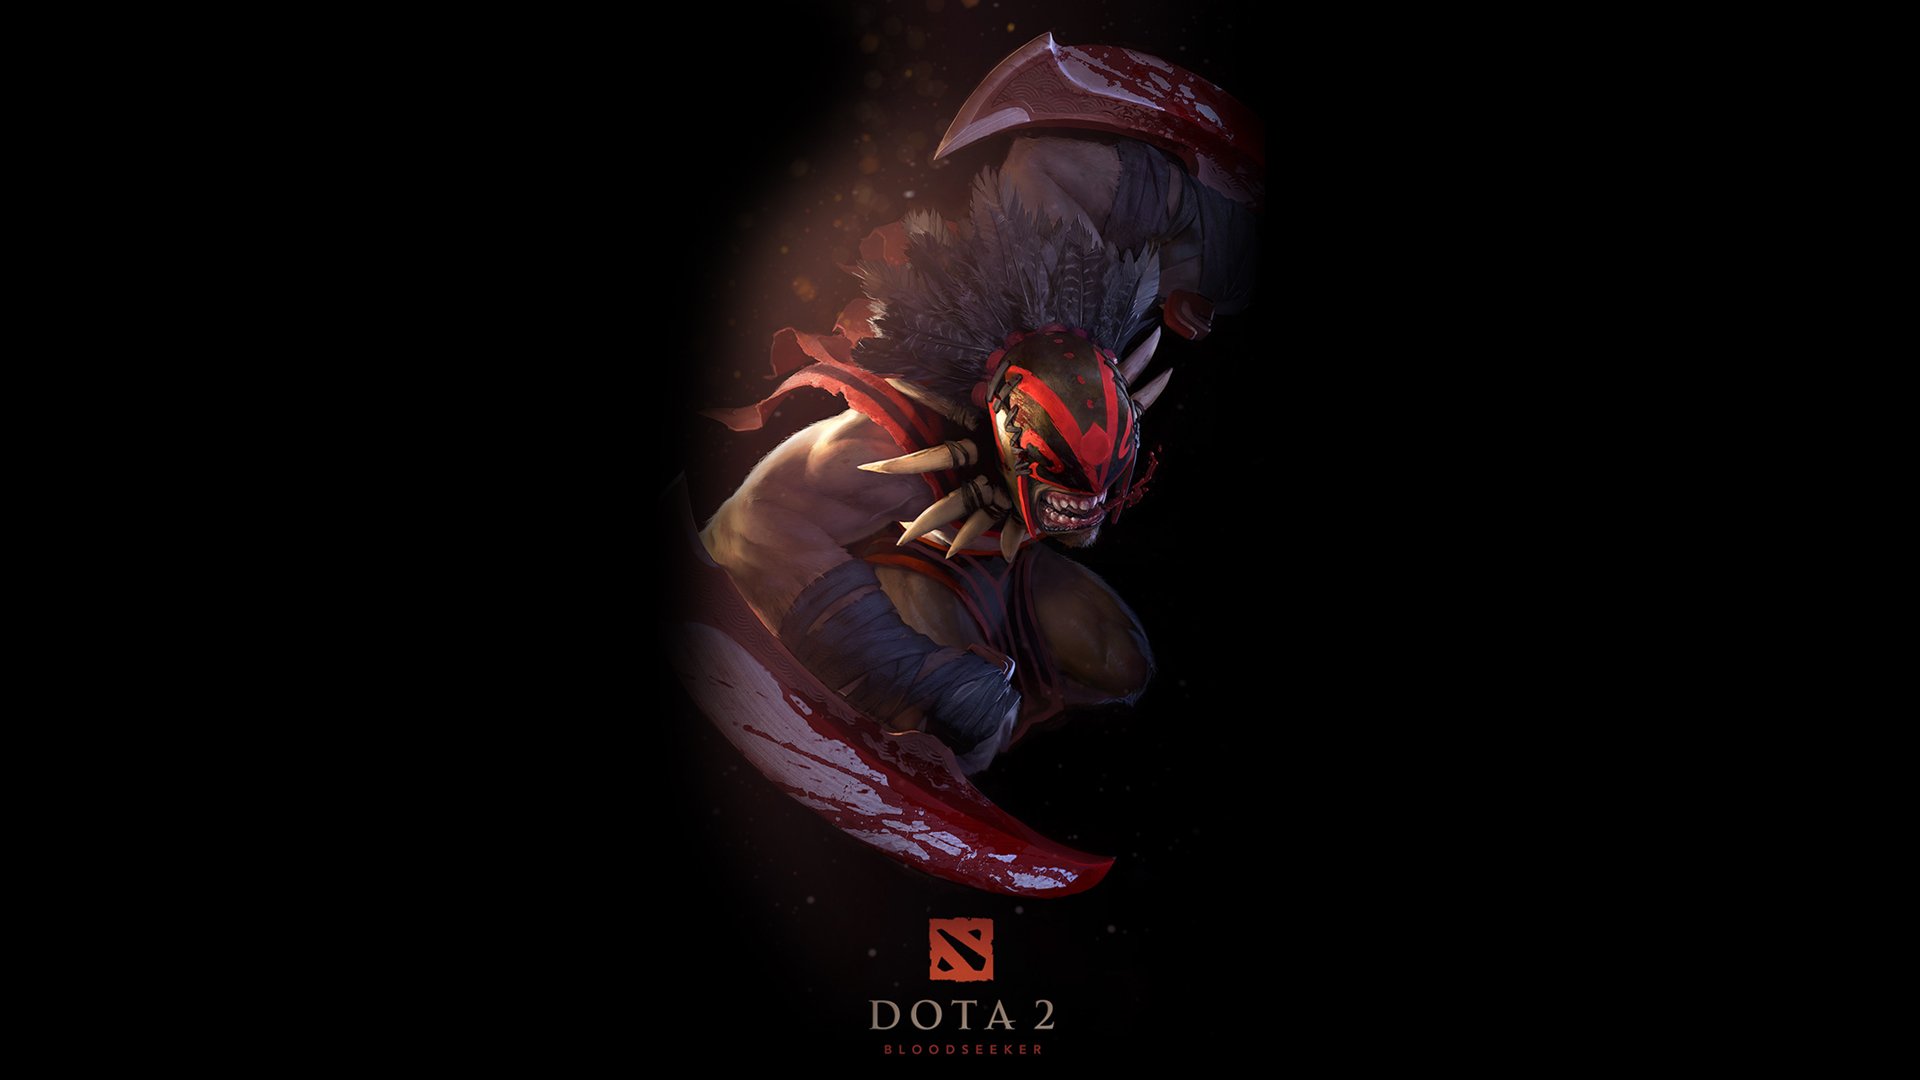 5 Bloodseeker Dota 2 Hd Wallpapers Background Images Images, Photos, Reviews